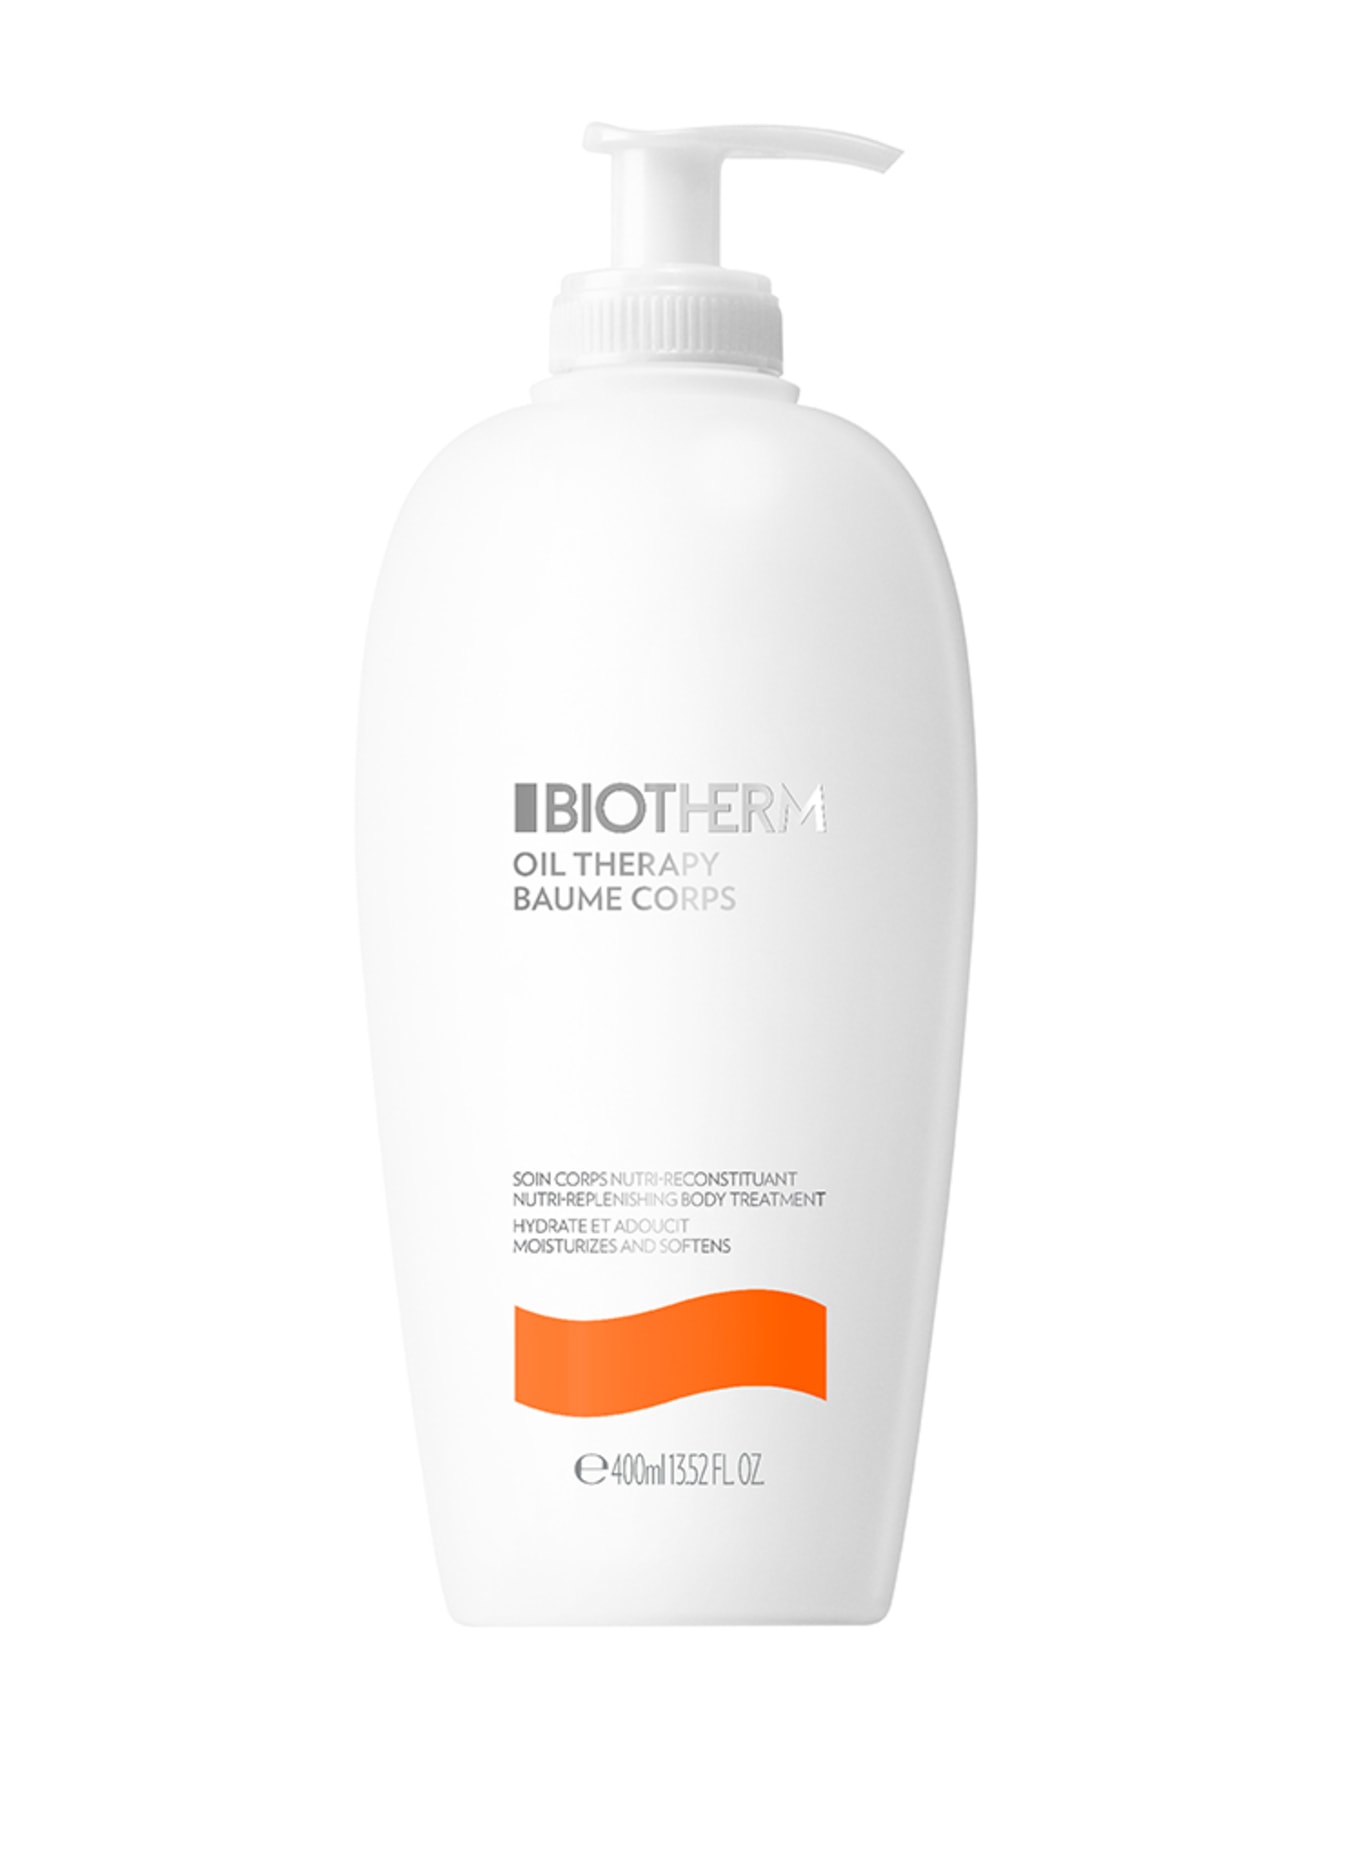 BIOTHERM OIL THERAPY BAUME CORPS (Obrázek 1)